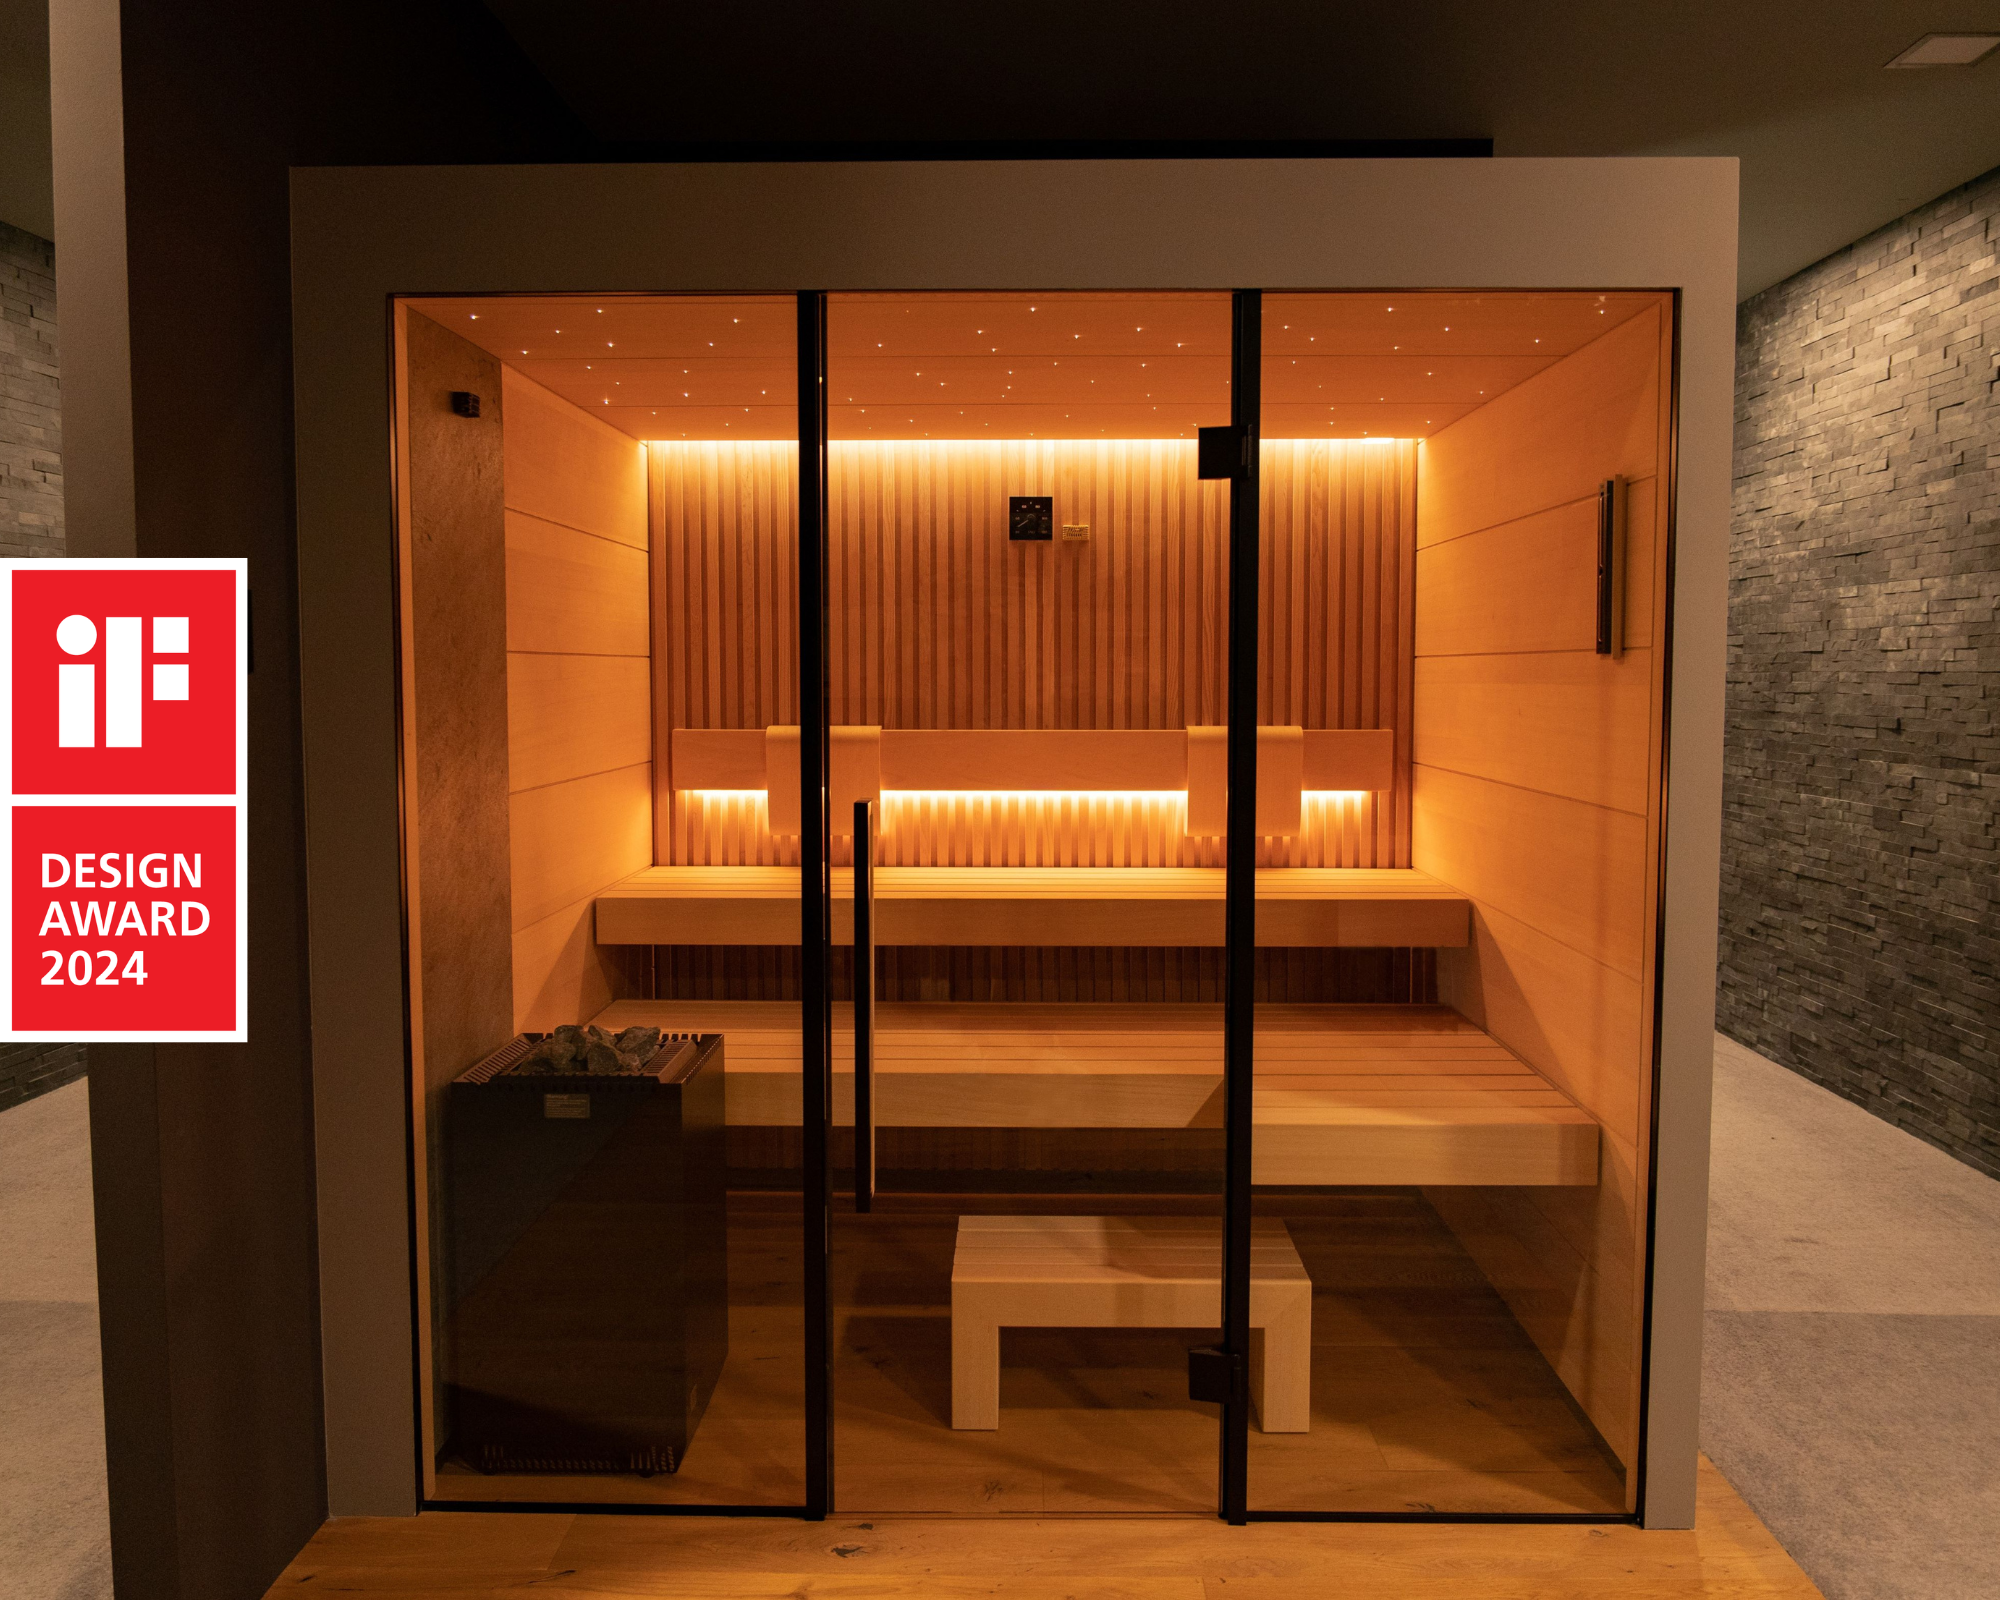 The TAO CONTI sauna has been honored with the esteemed iF DESIGN AWARD!